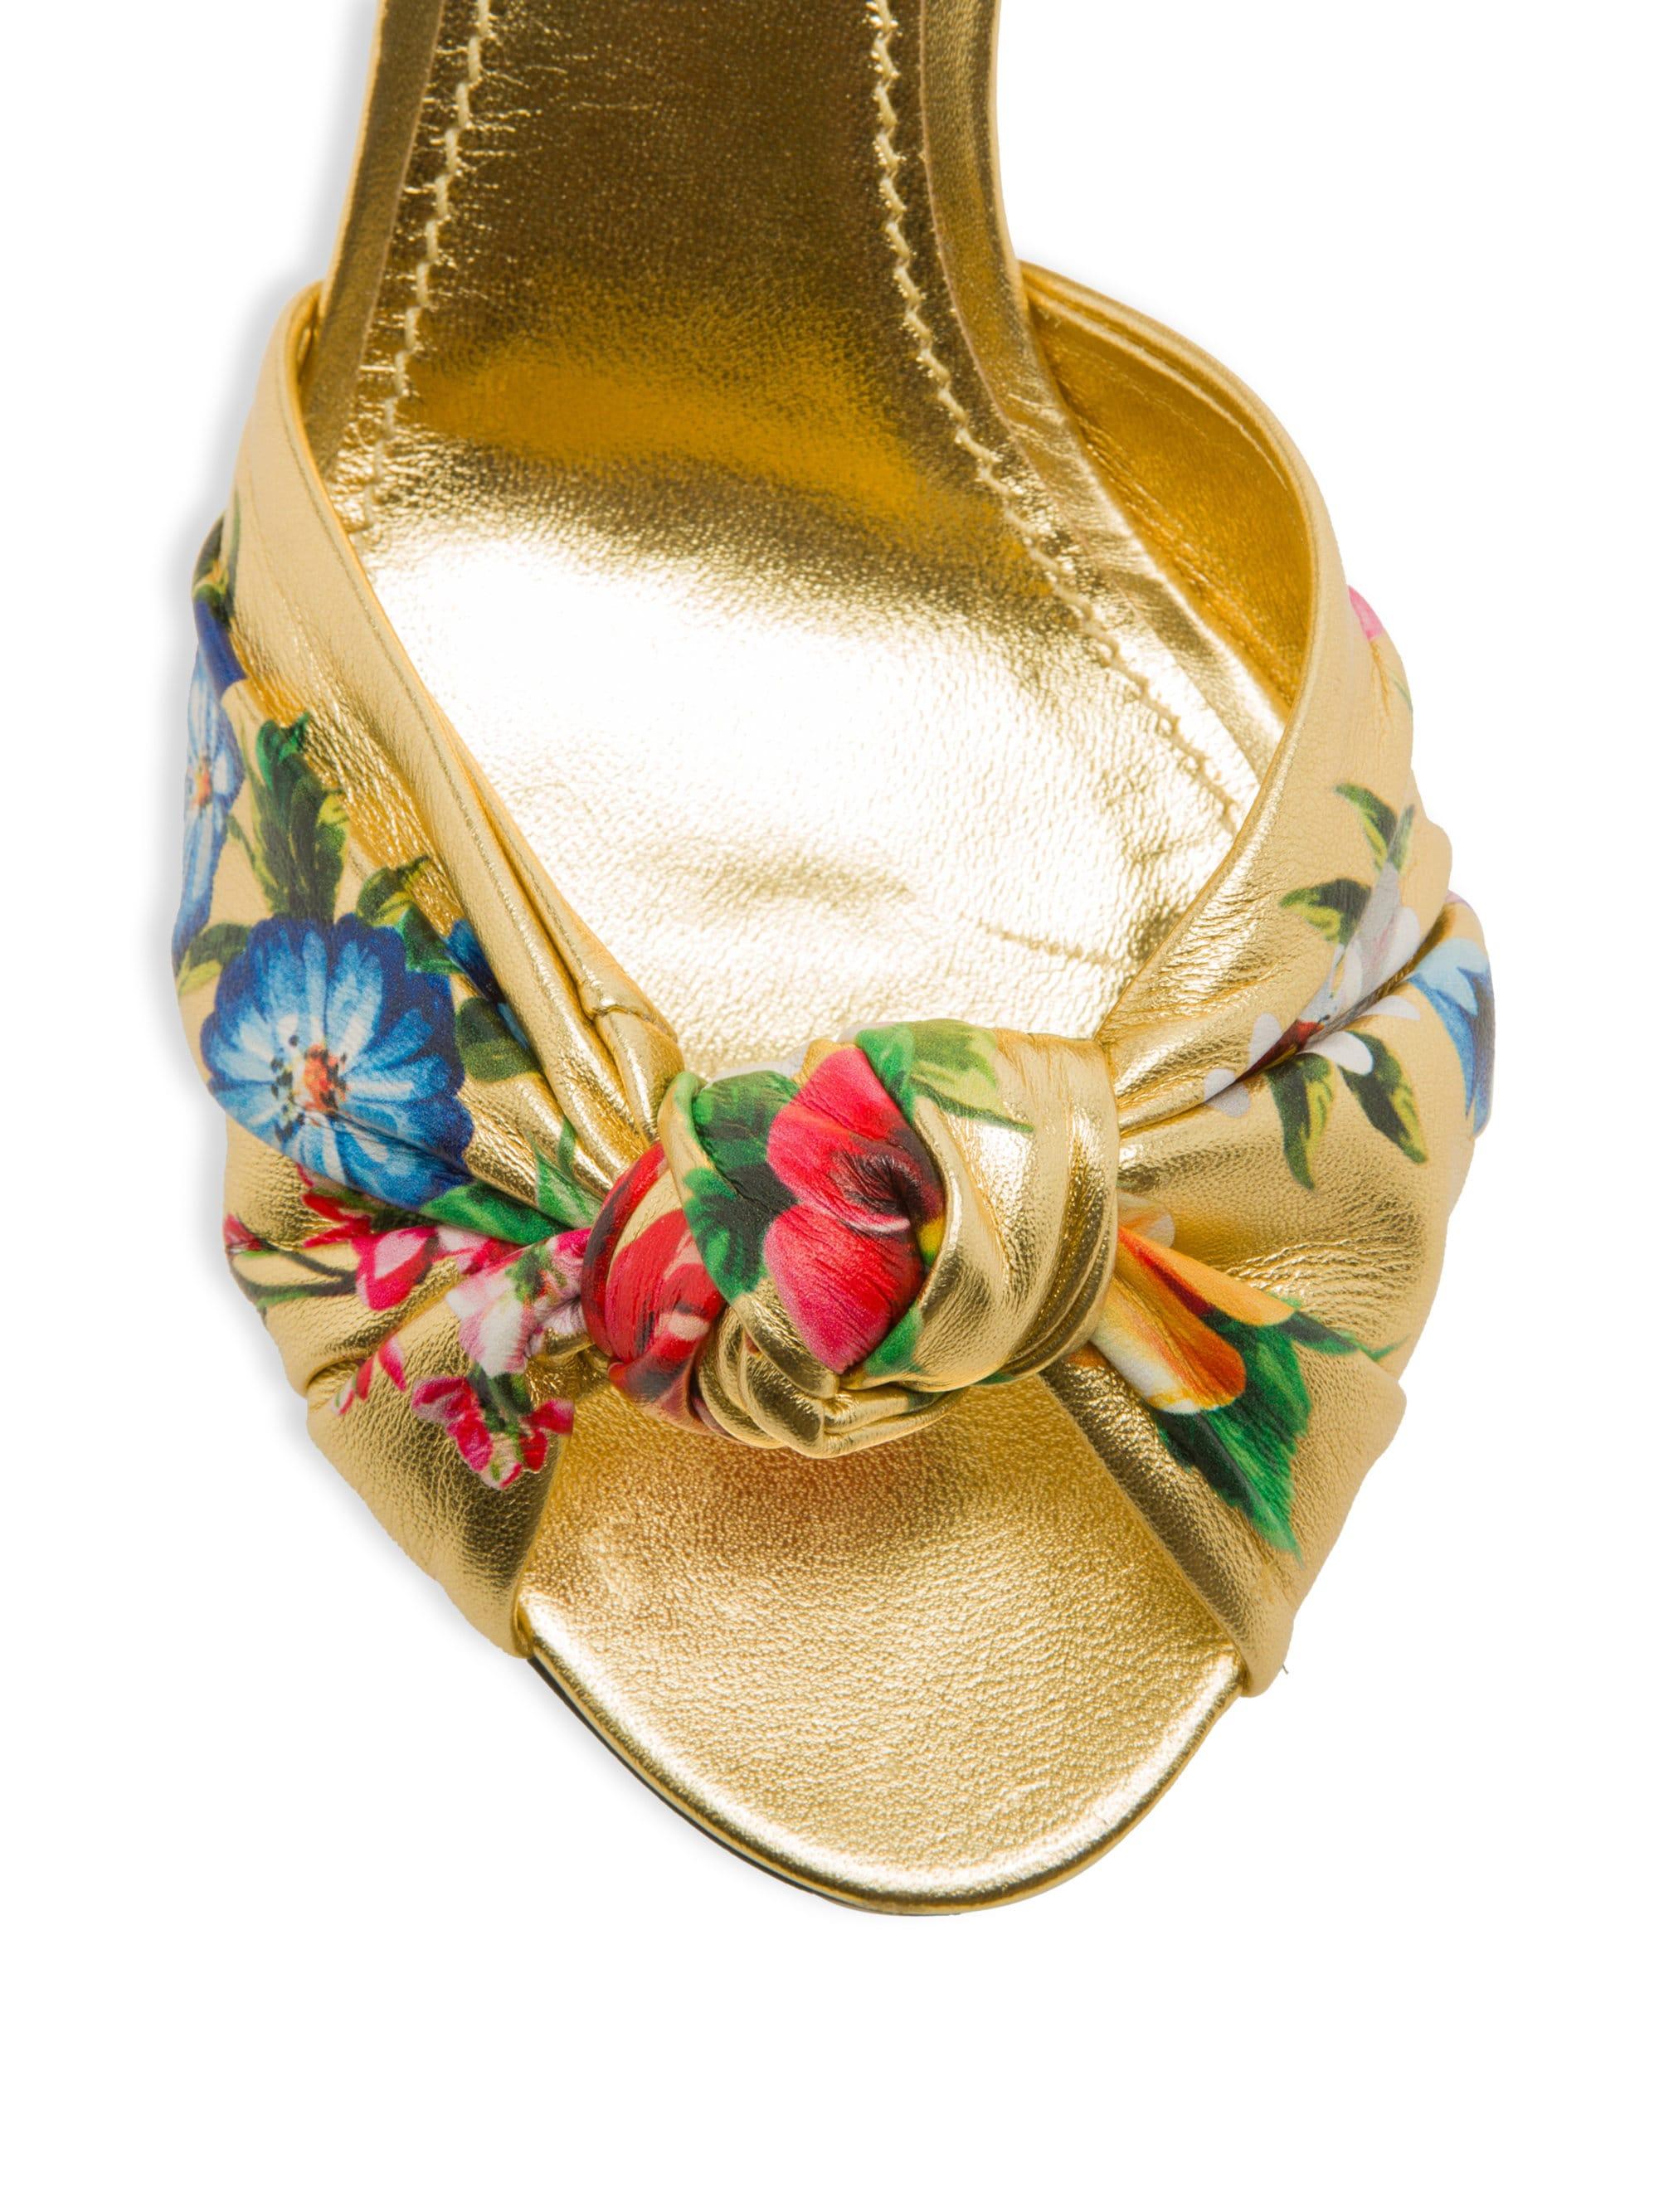 Dolce & Gabbana Leather Floral Sandals in Gold (Metallic) - Lyst